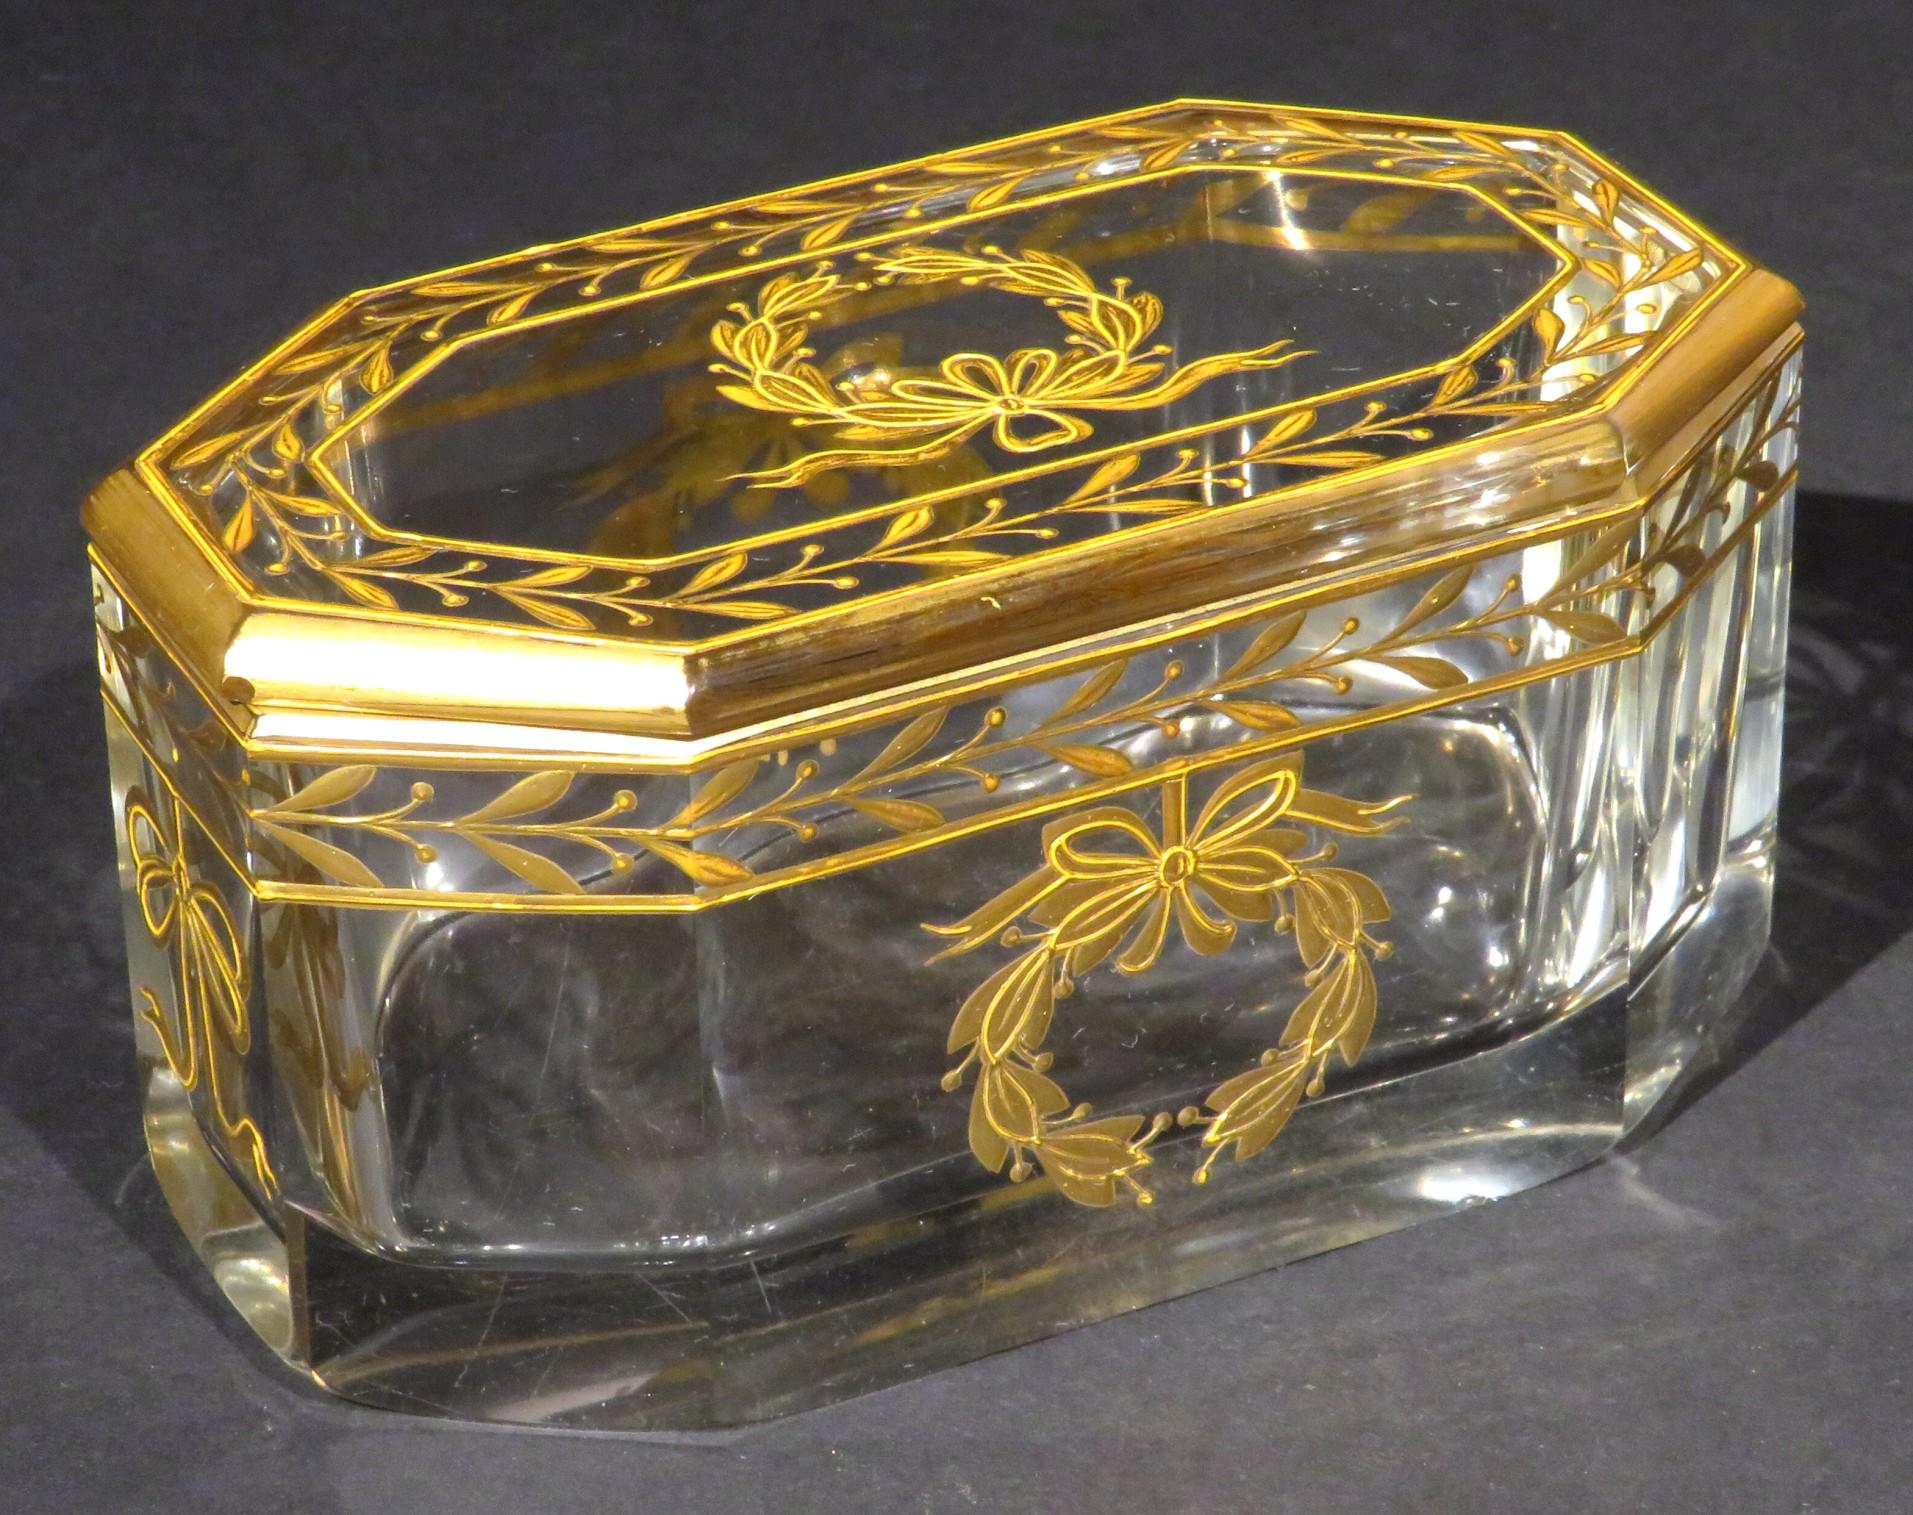 Neoclassical Revival Large Early 20th Century Gilt Decorated Glass Dresser Jar or Box, Circa 1920 For Sale